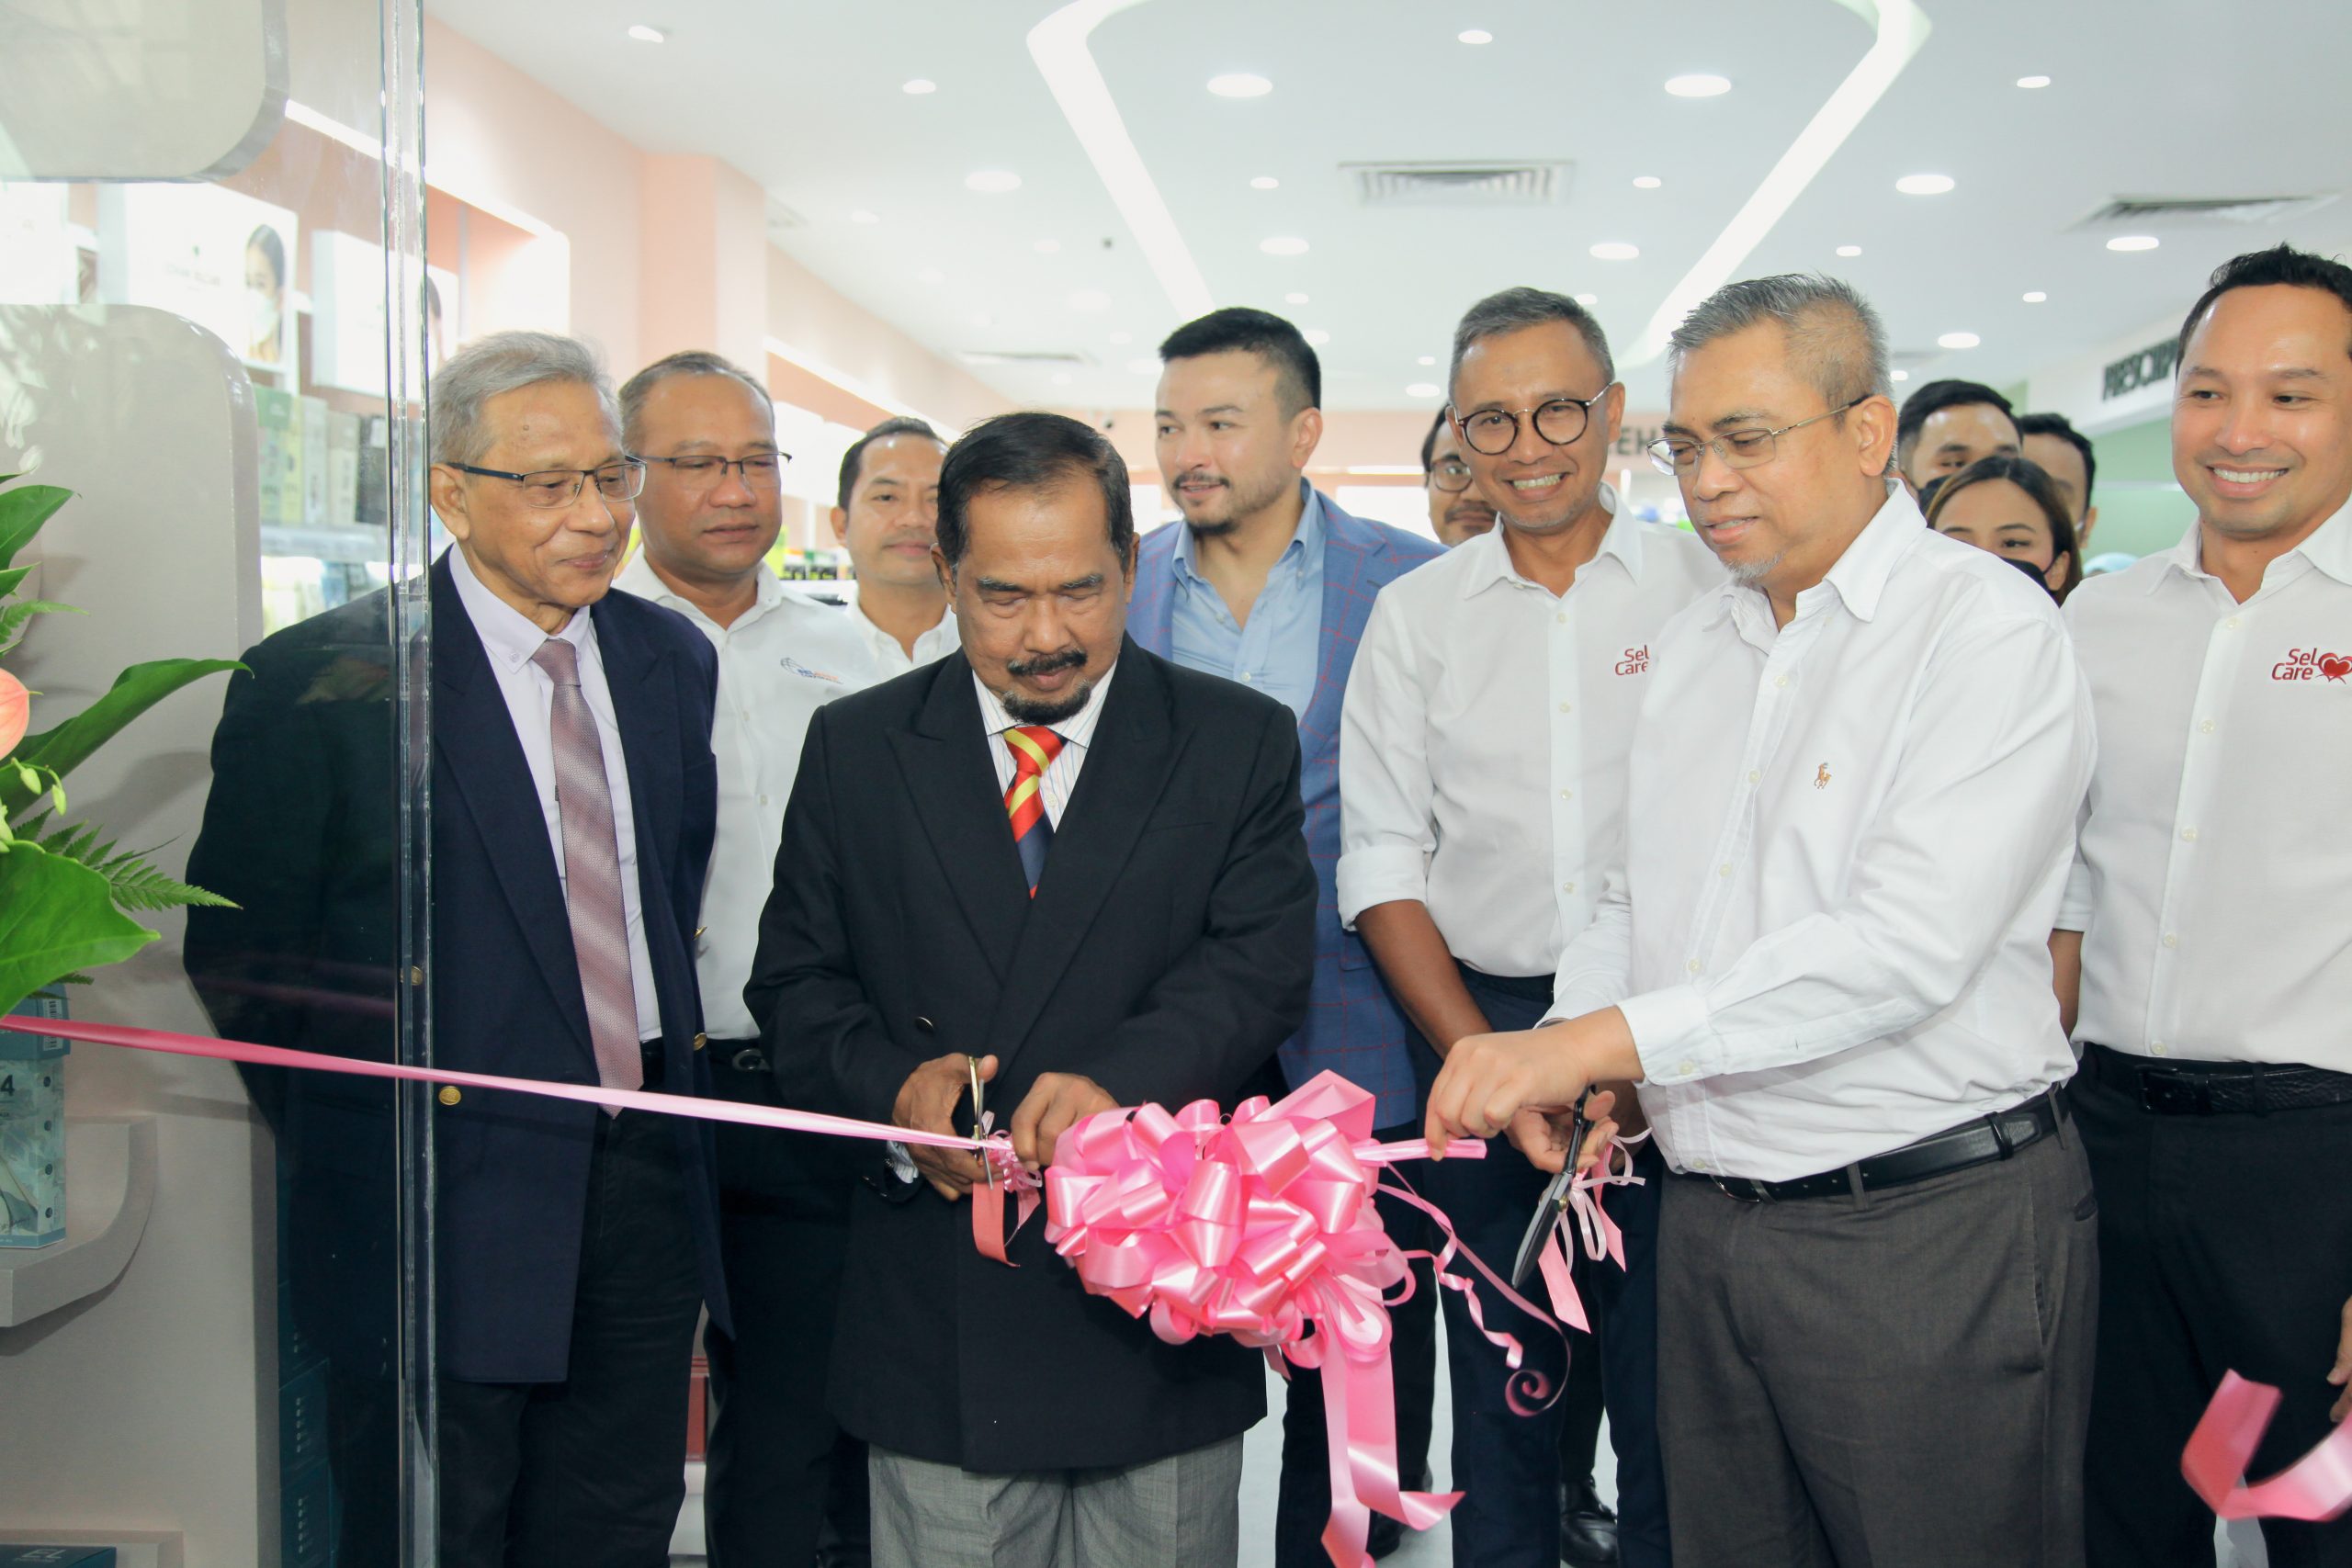 JOVIAN SELCARE PHARMACY OPENS FOURTH OUTLET IN SHAH ALAM